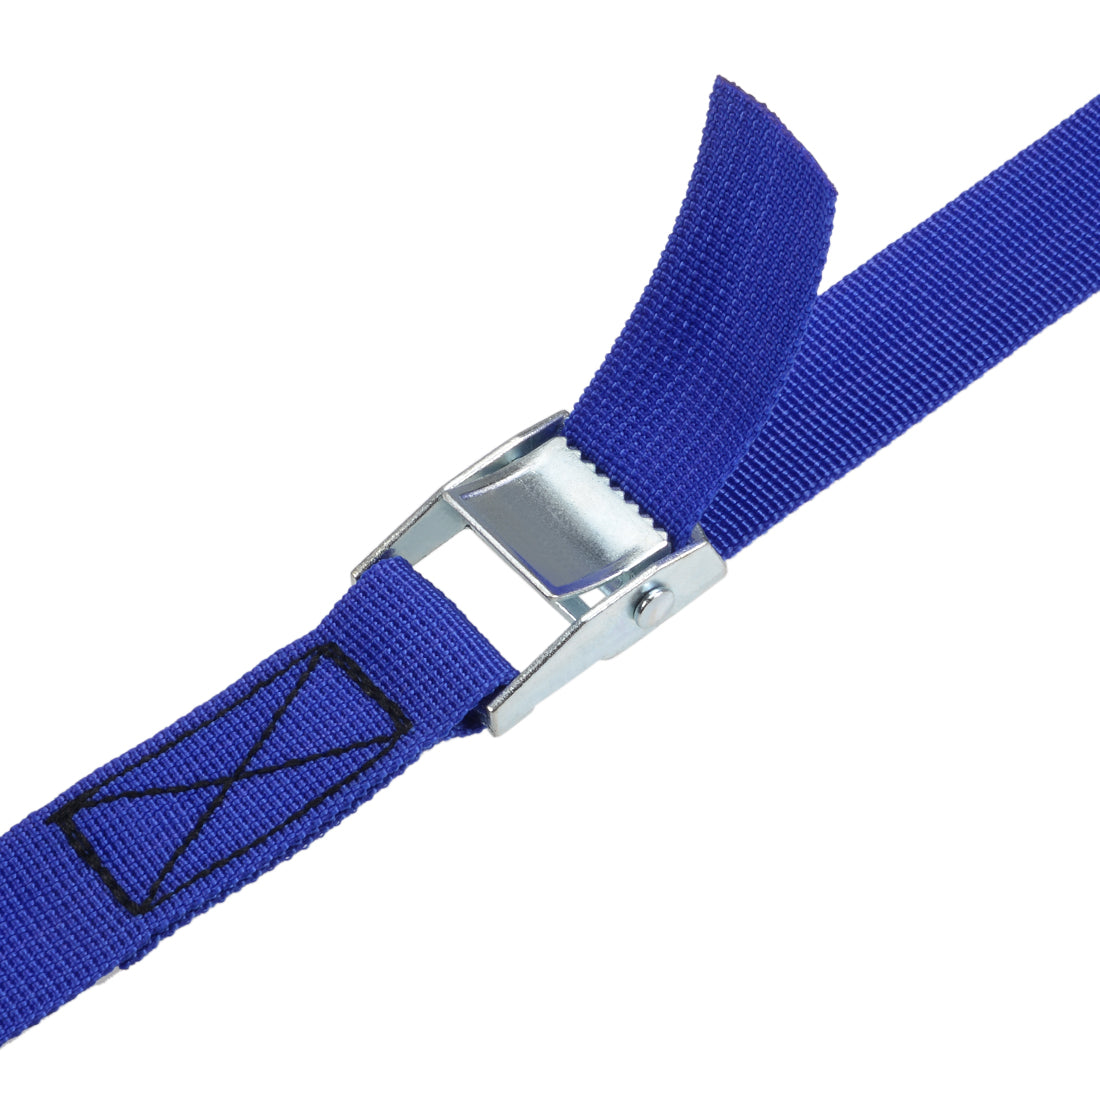 uxcell Uxcell 12M x 25mm Lashing Strap Cargo Tie Down Straps w Cam Lock Buckle 250Kg Work Load, Blue, 2Pcs